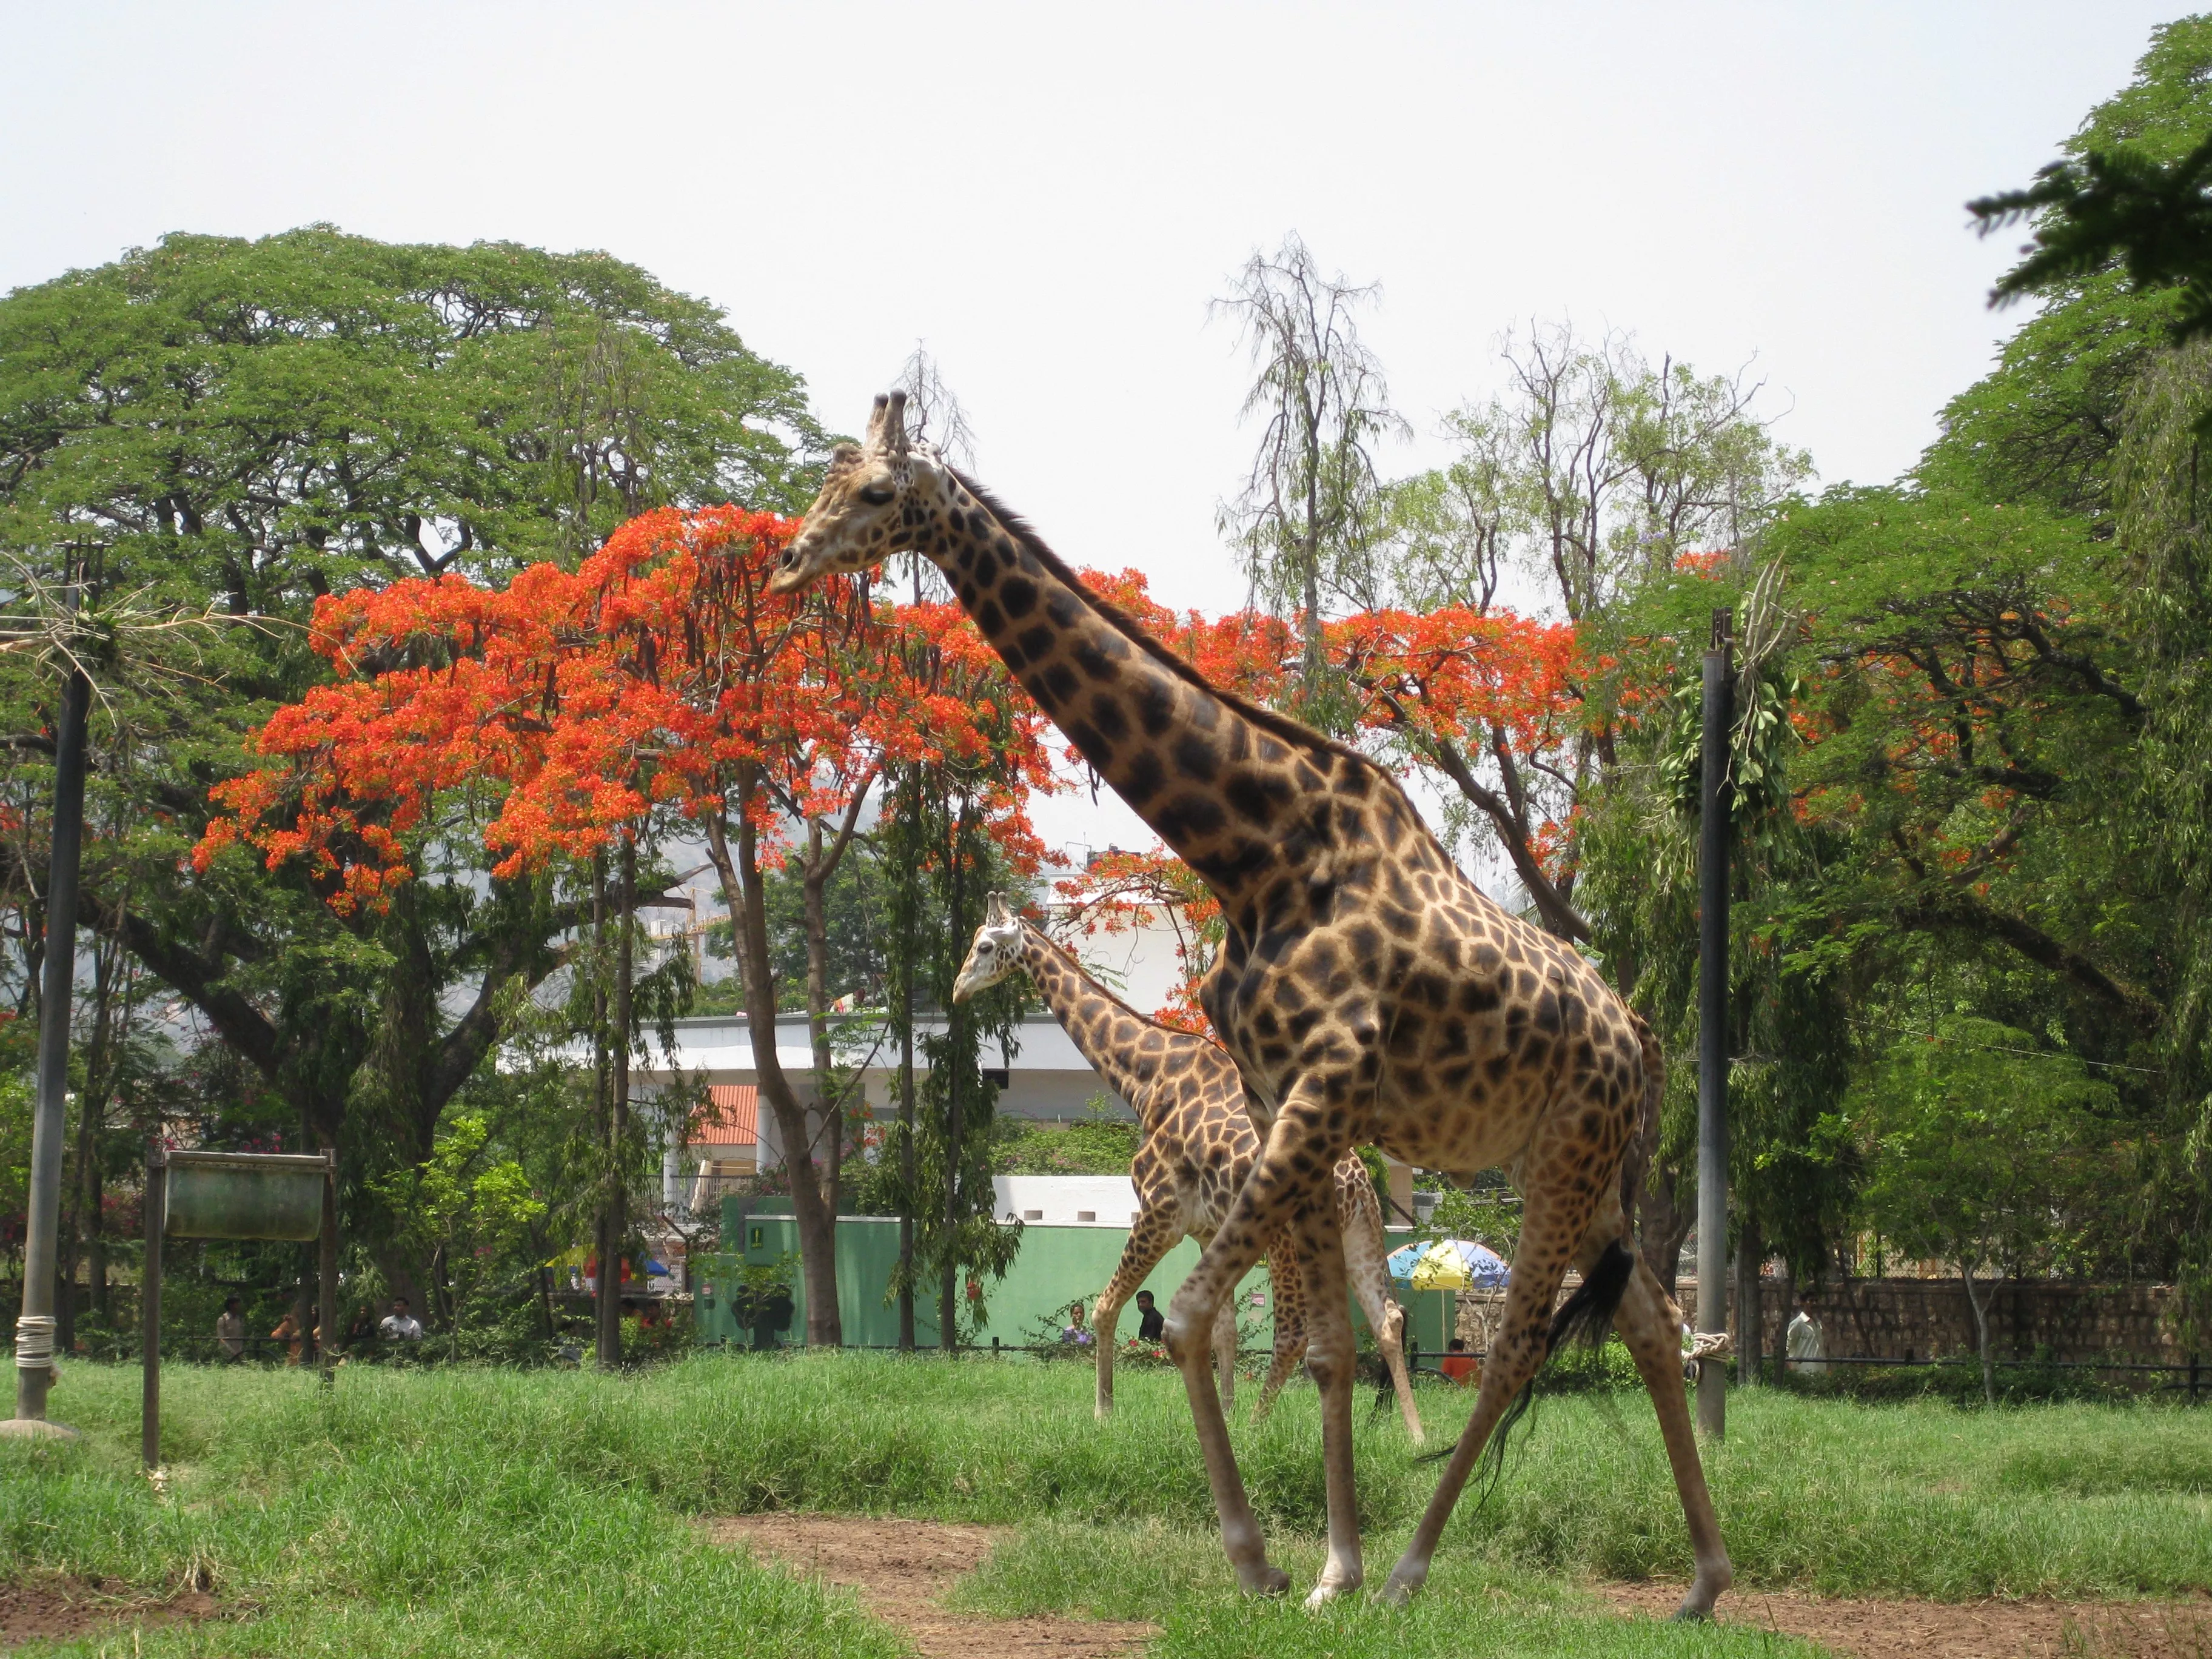 Zoological Garden Alipore in India, Central Asia | Zoos & Sanctuaries - Rated 7.8